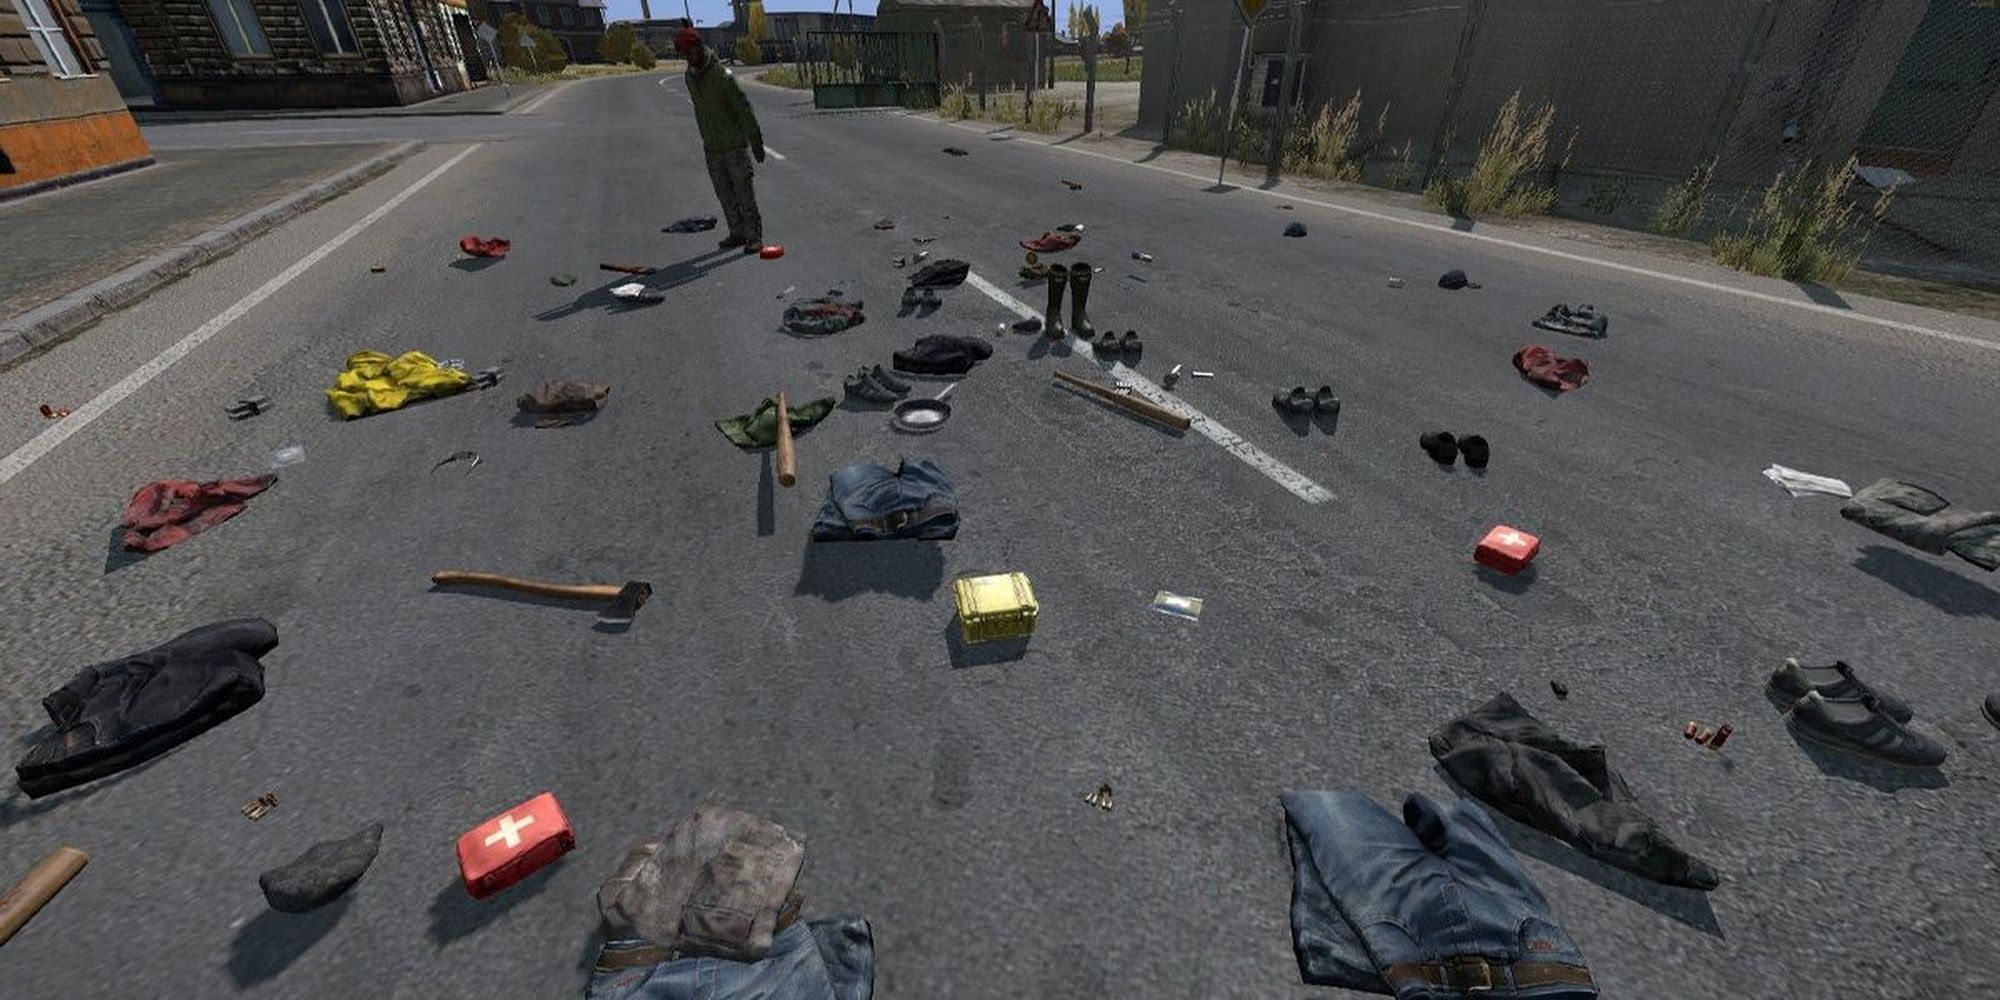 DayZ: A Large Number Of Ingame Items Displayed On The Highway